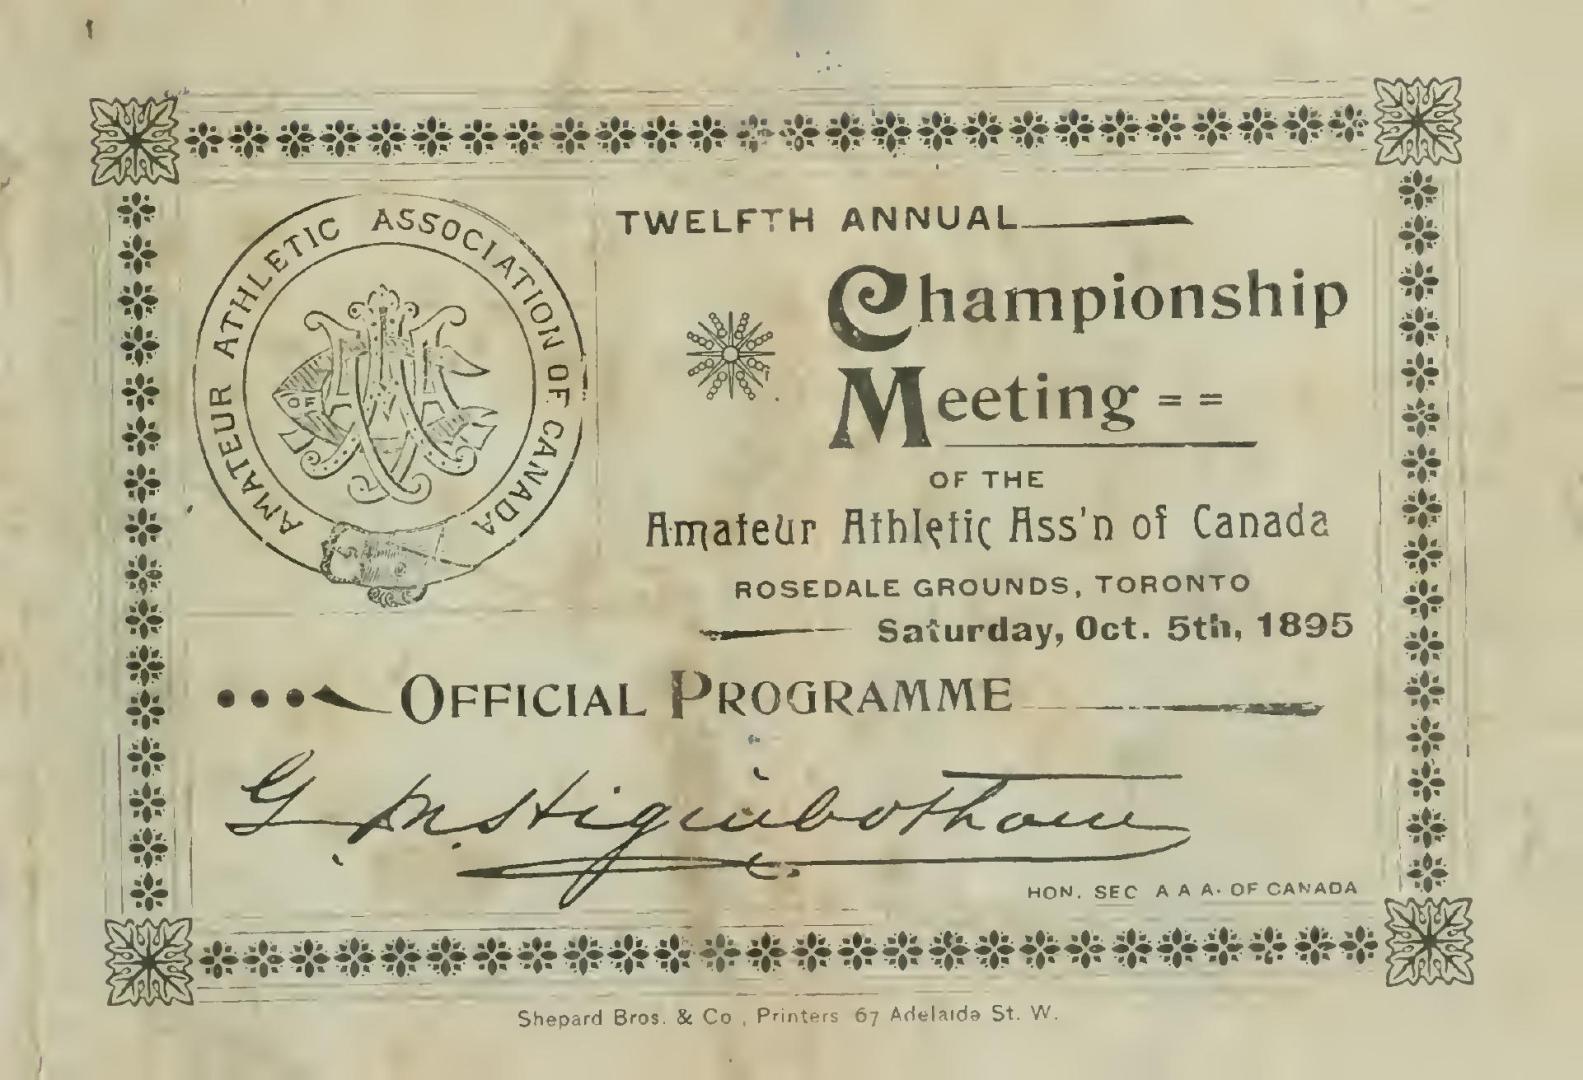 Twelfth annual championship meeting of the Amateur Athletic Ass'n of Canada